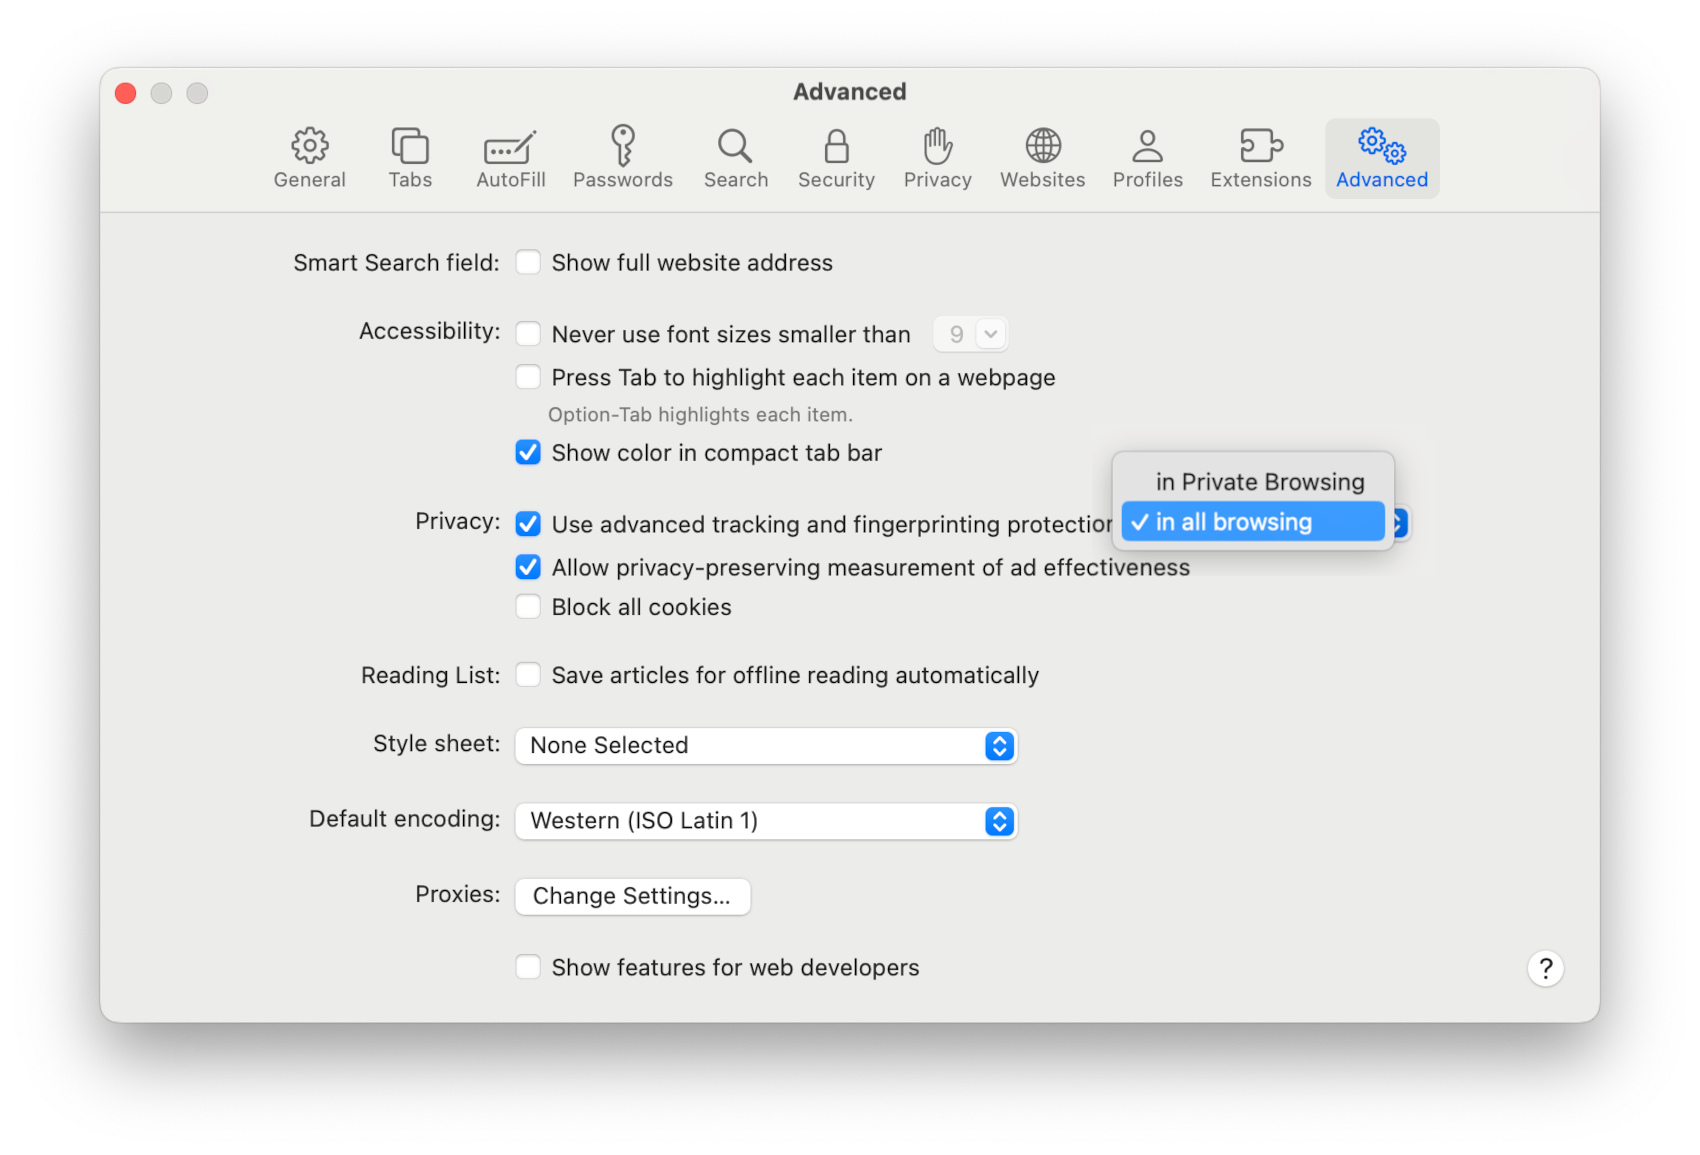 Safari Advanced Settings with "Use advanced tracking and fingerprinting protection in all browsing" selected